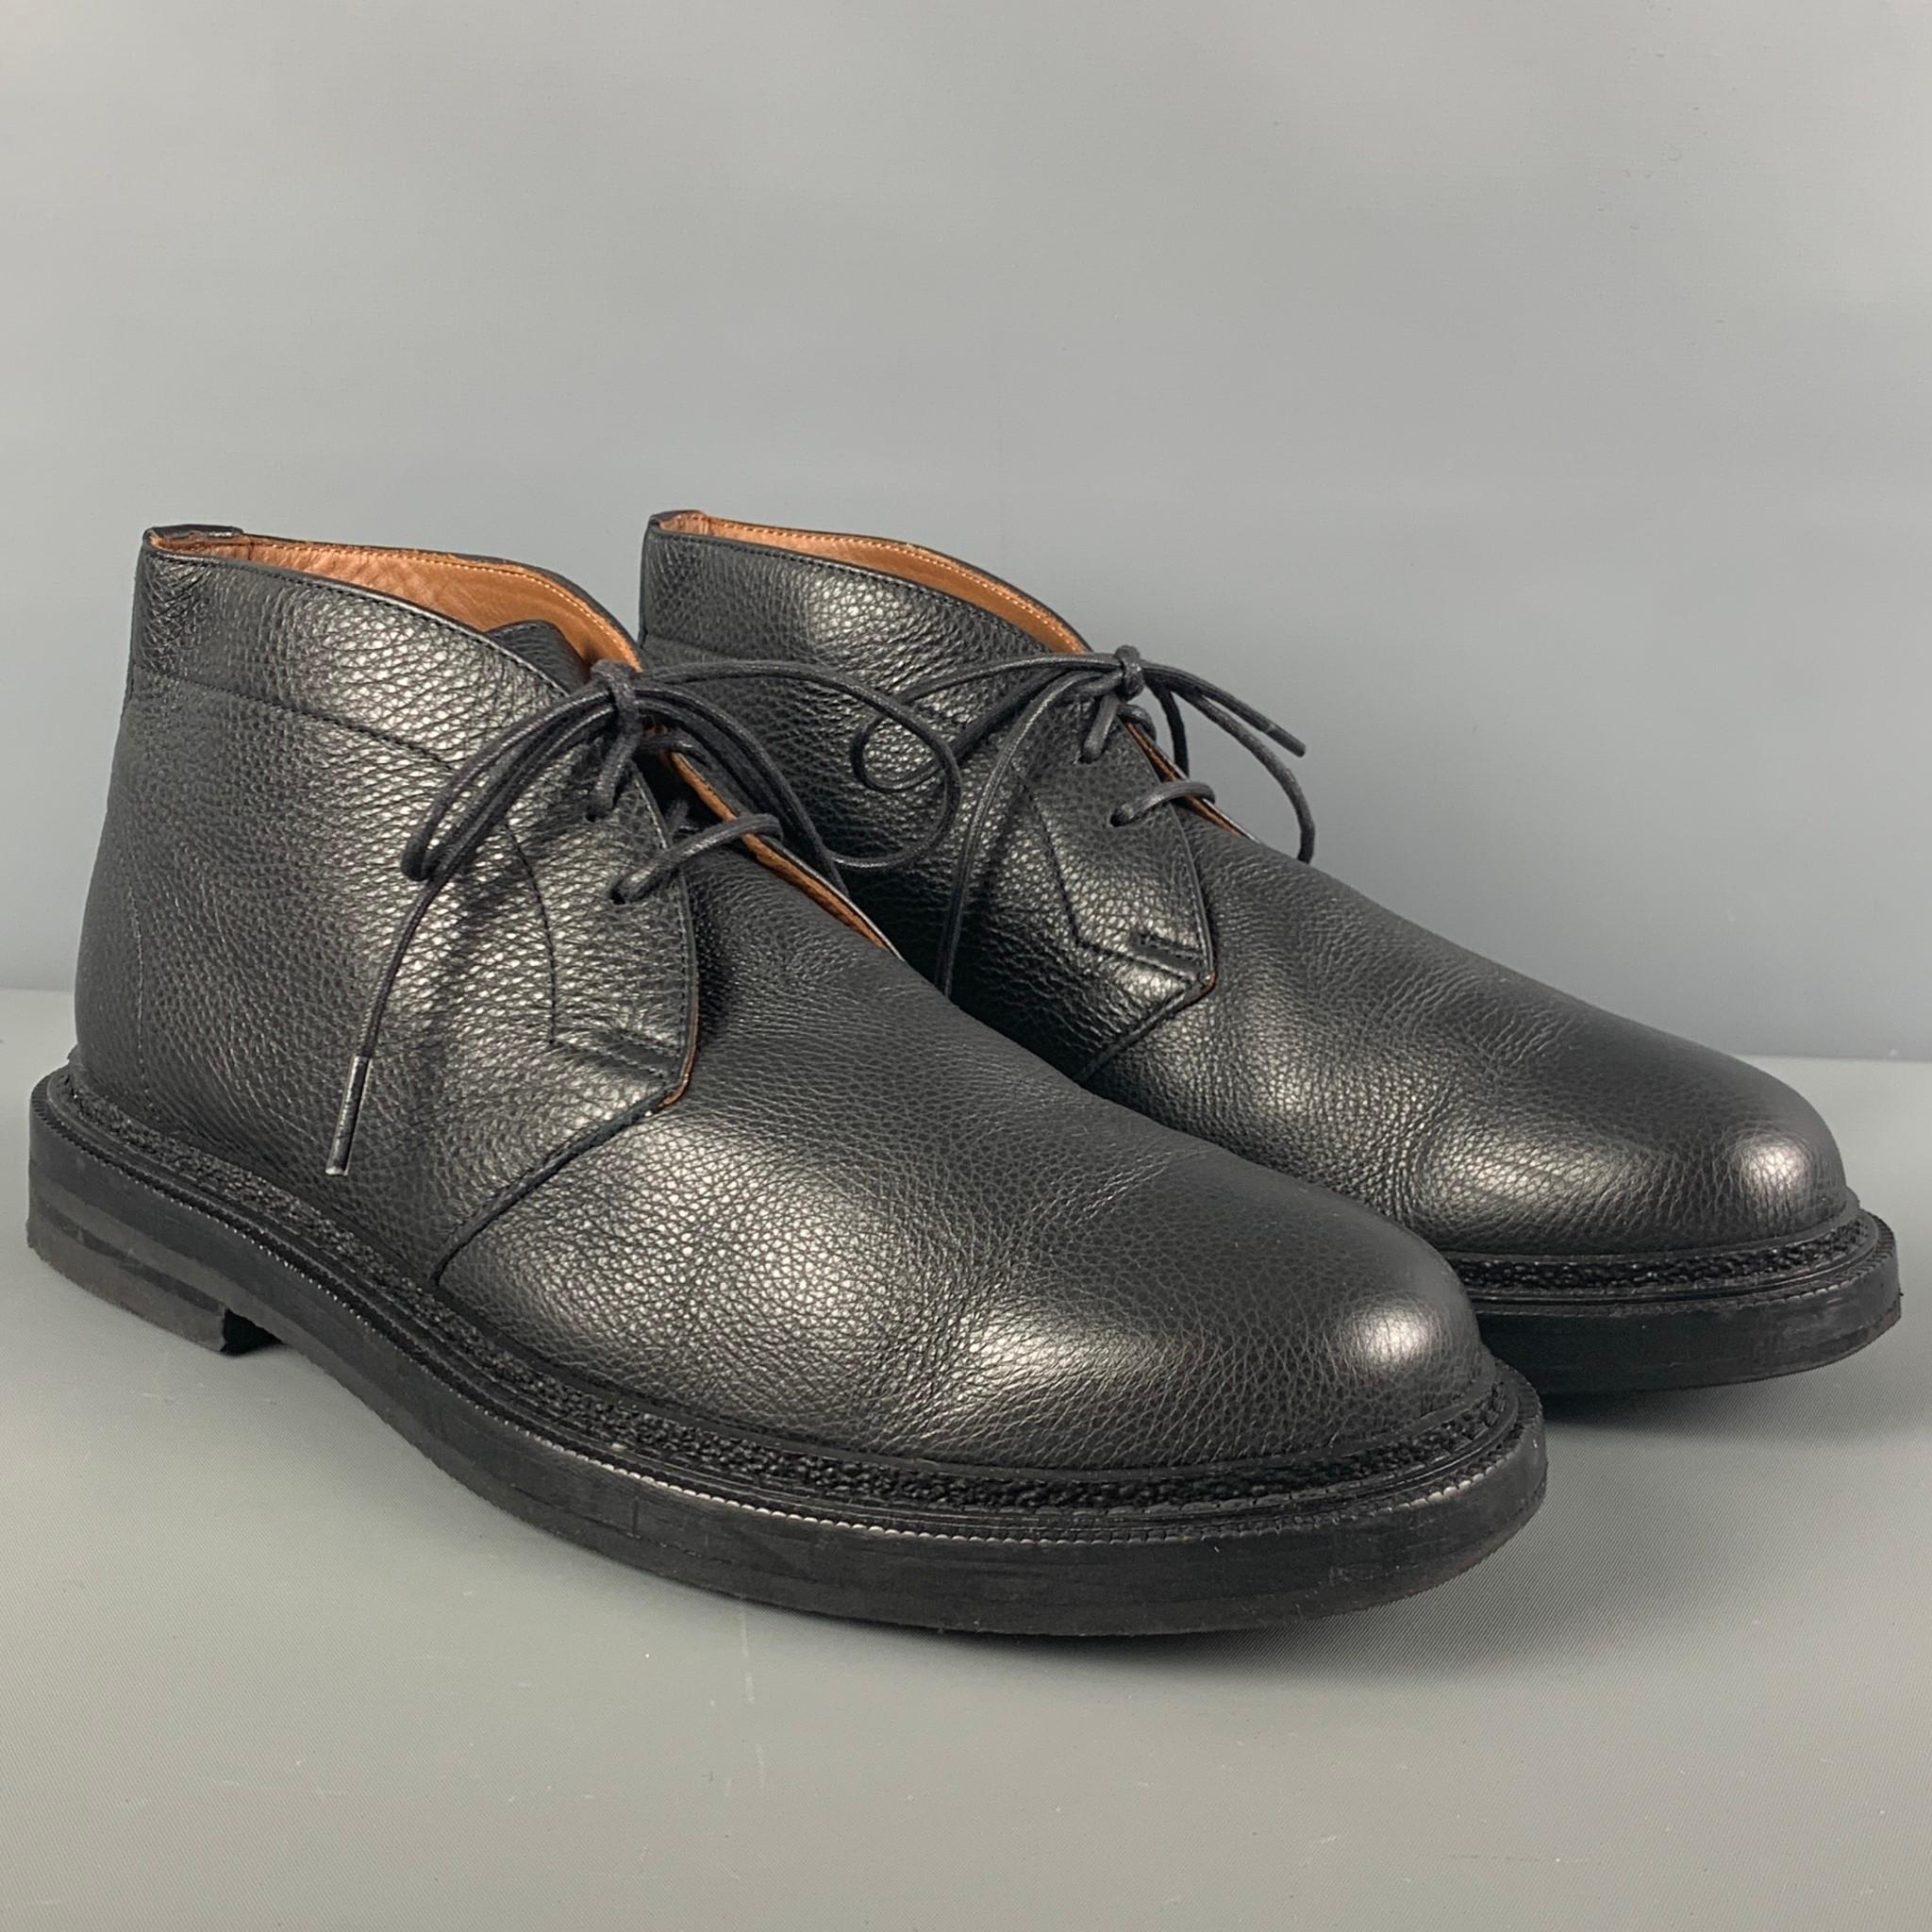 AQUATALIA boots comes in a black pebble grain leather featuring a chukka style, round toe, and a lace up closure. Made in Italy. 

Very Good Pre-Owned Condition.
Marked: 10.5 M
Original Retail Price: $450.00

Measurements:

Length: 12.5 in.
Width: